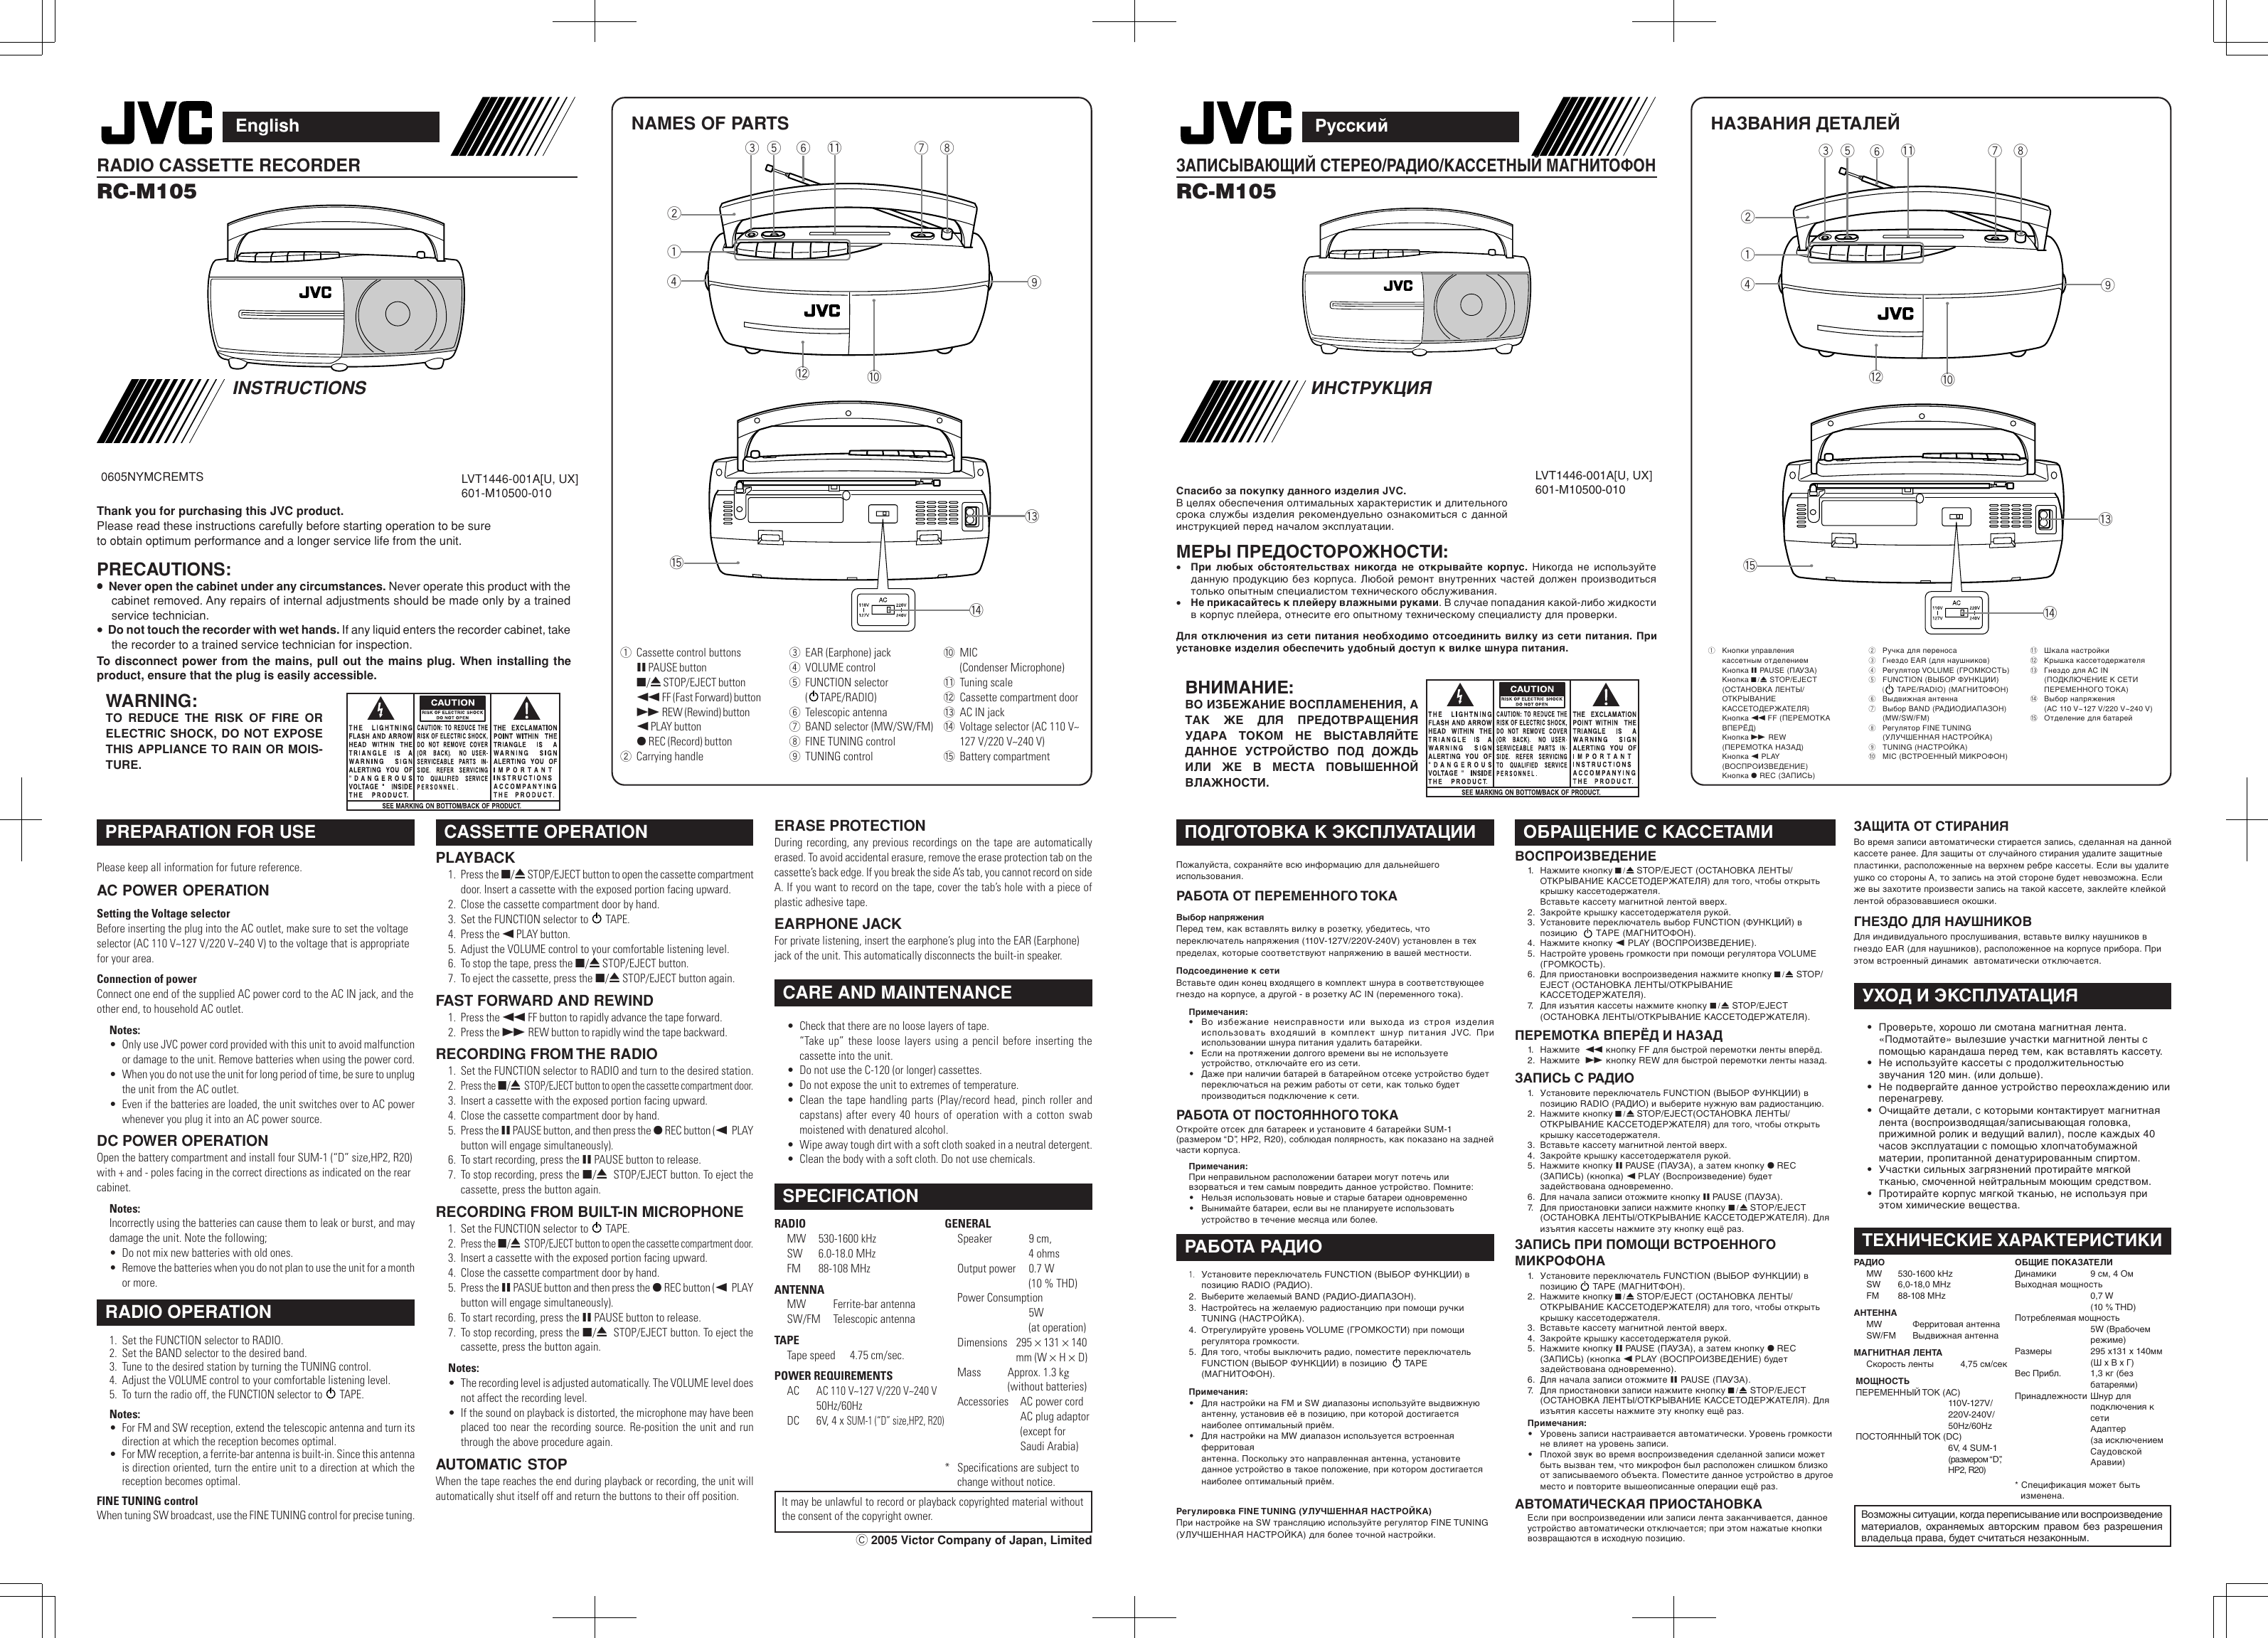 Page 1 of 2 - JVC RC-M105 User Manual LVT1446-001A